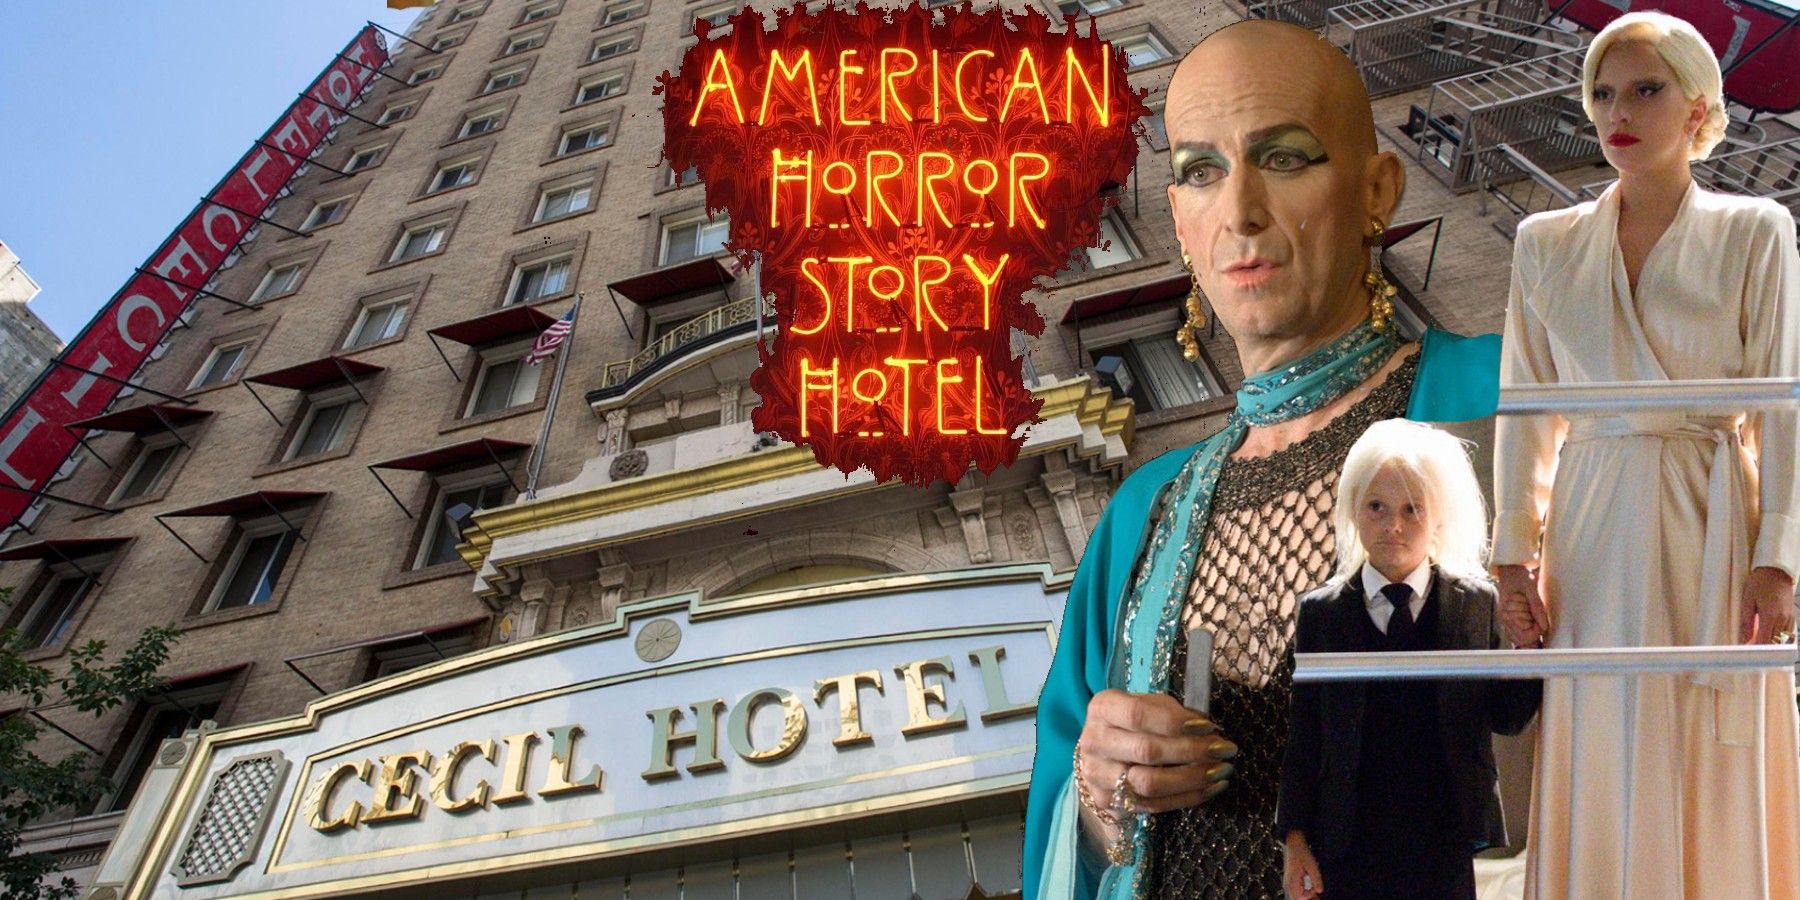 AHS: Hotel characters and the Cecil Hotel